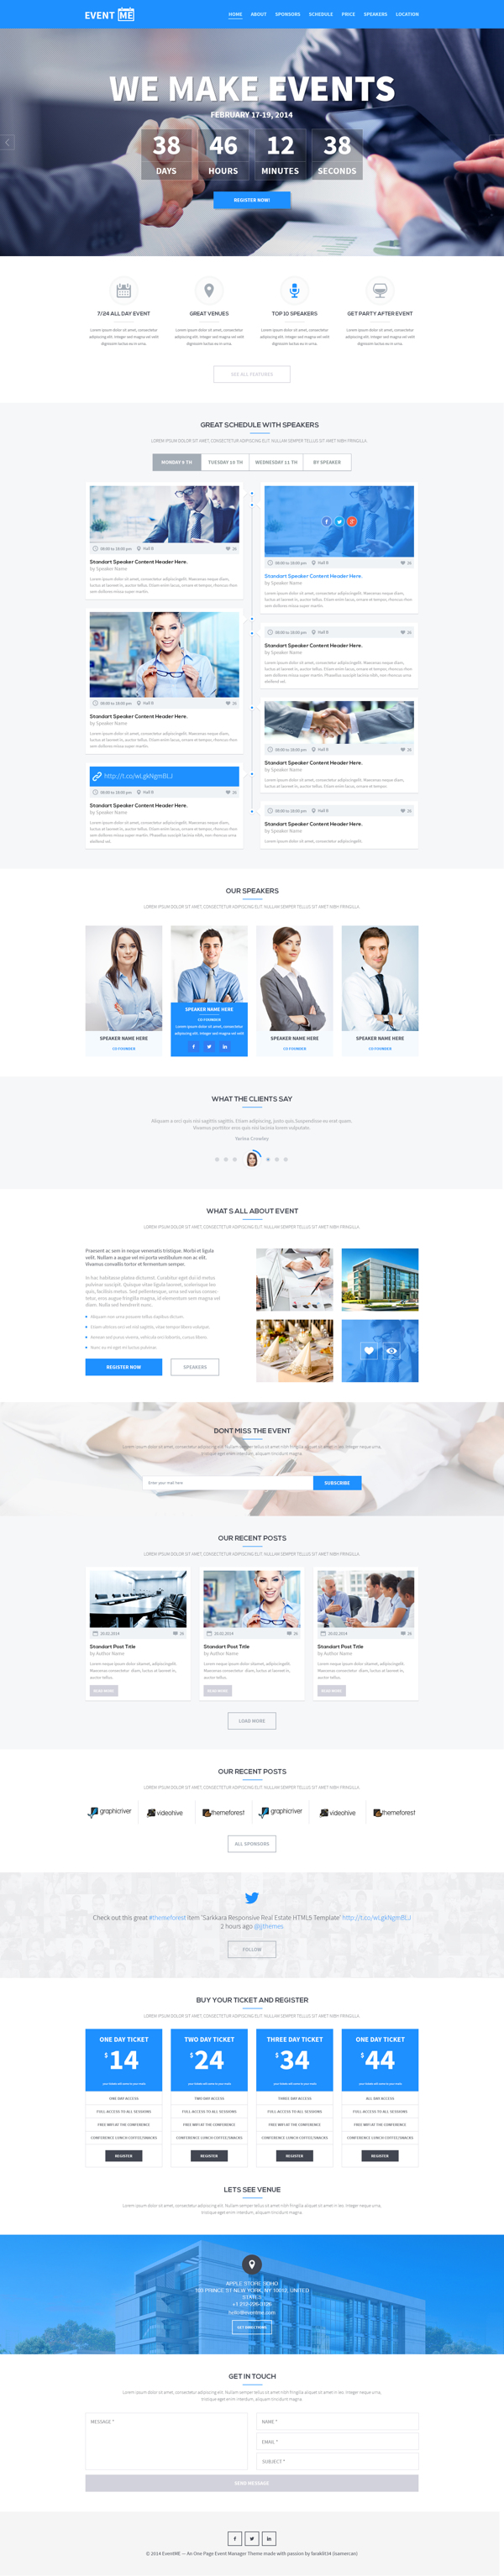 EventME - One Page Event Manager PSD Theme ( FREE PSD )